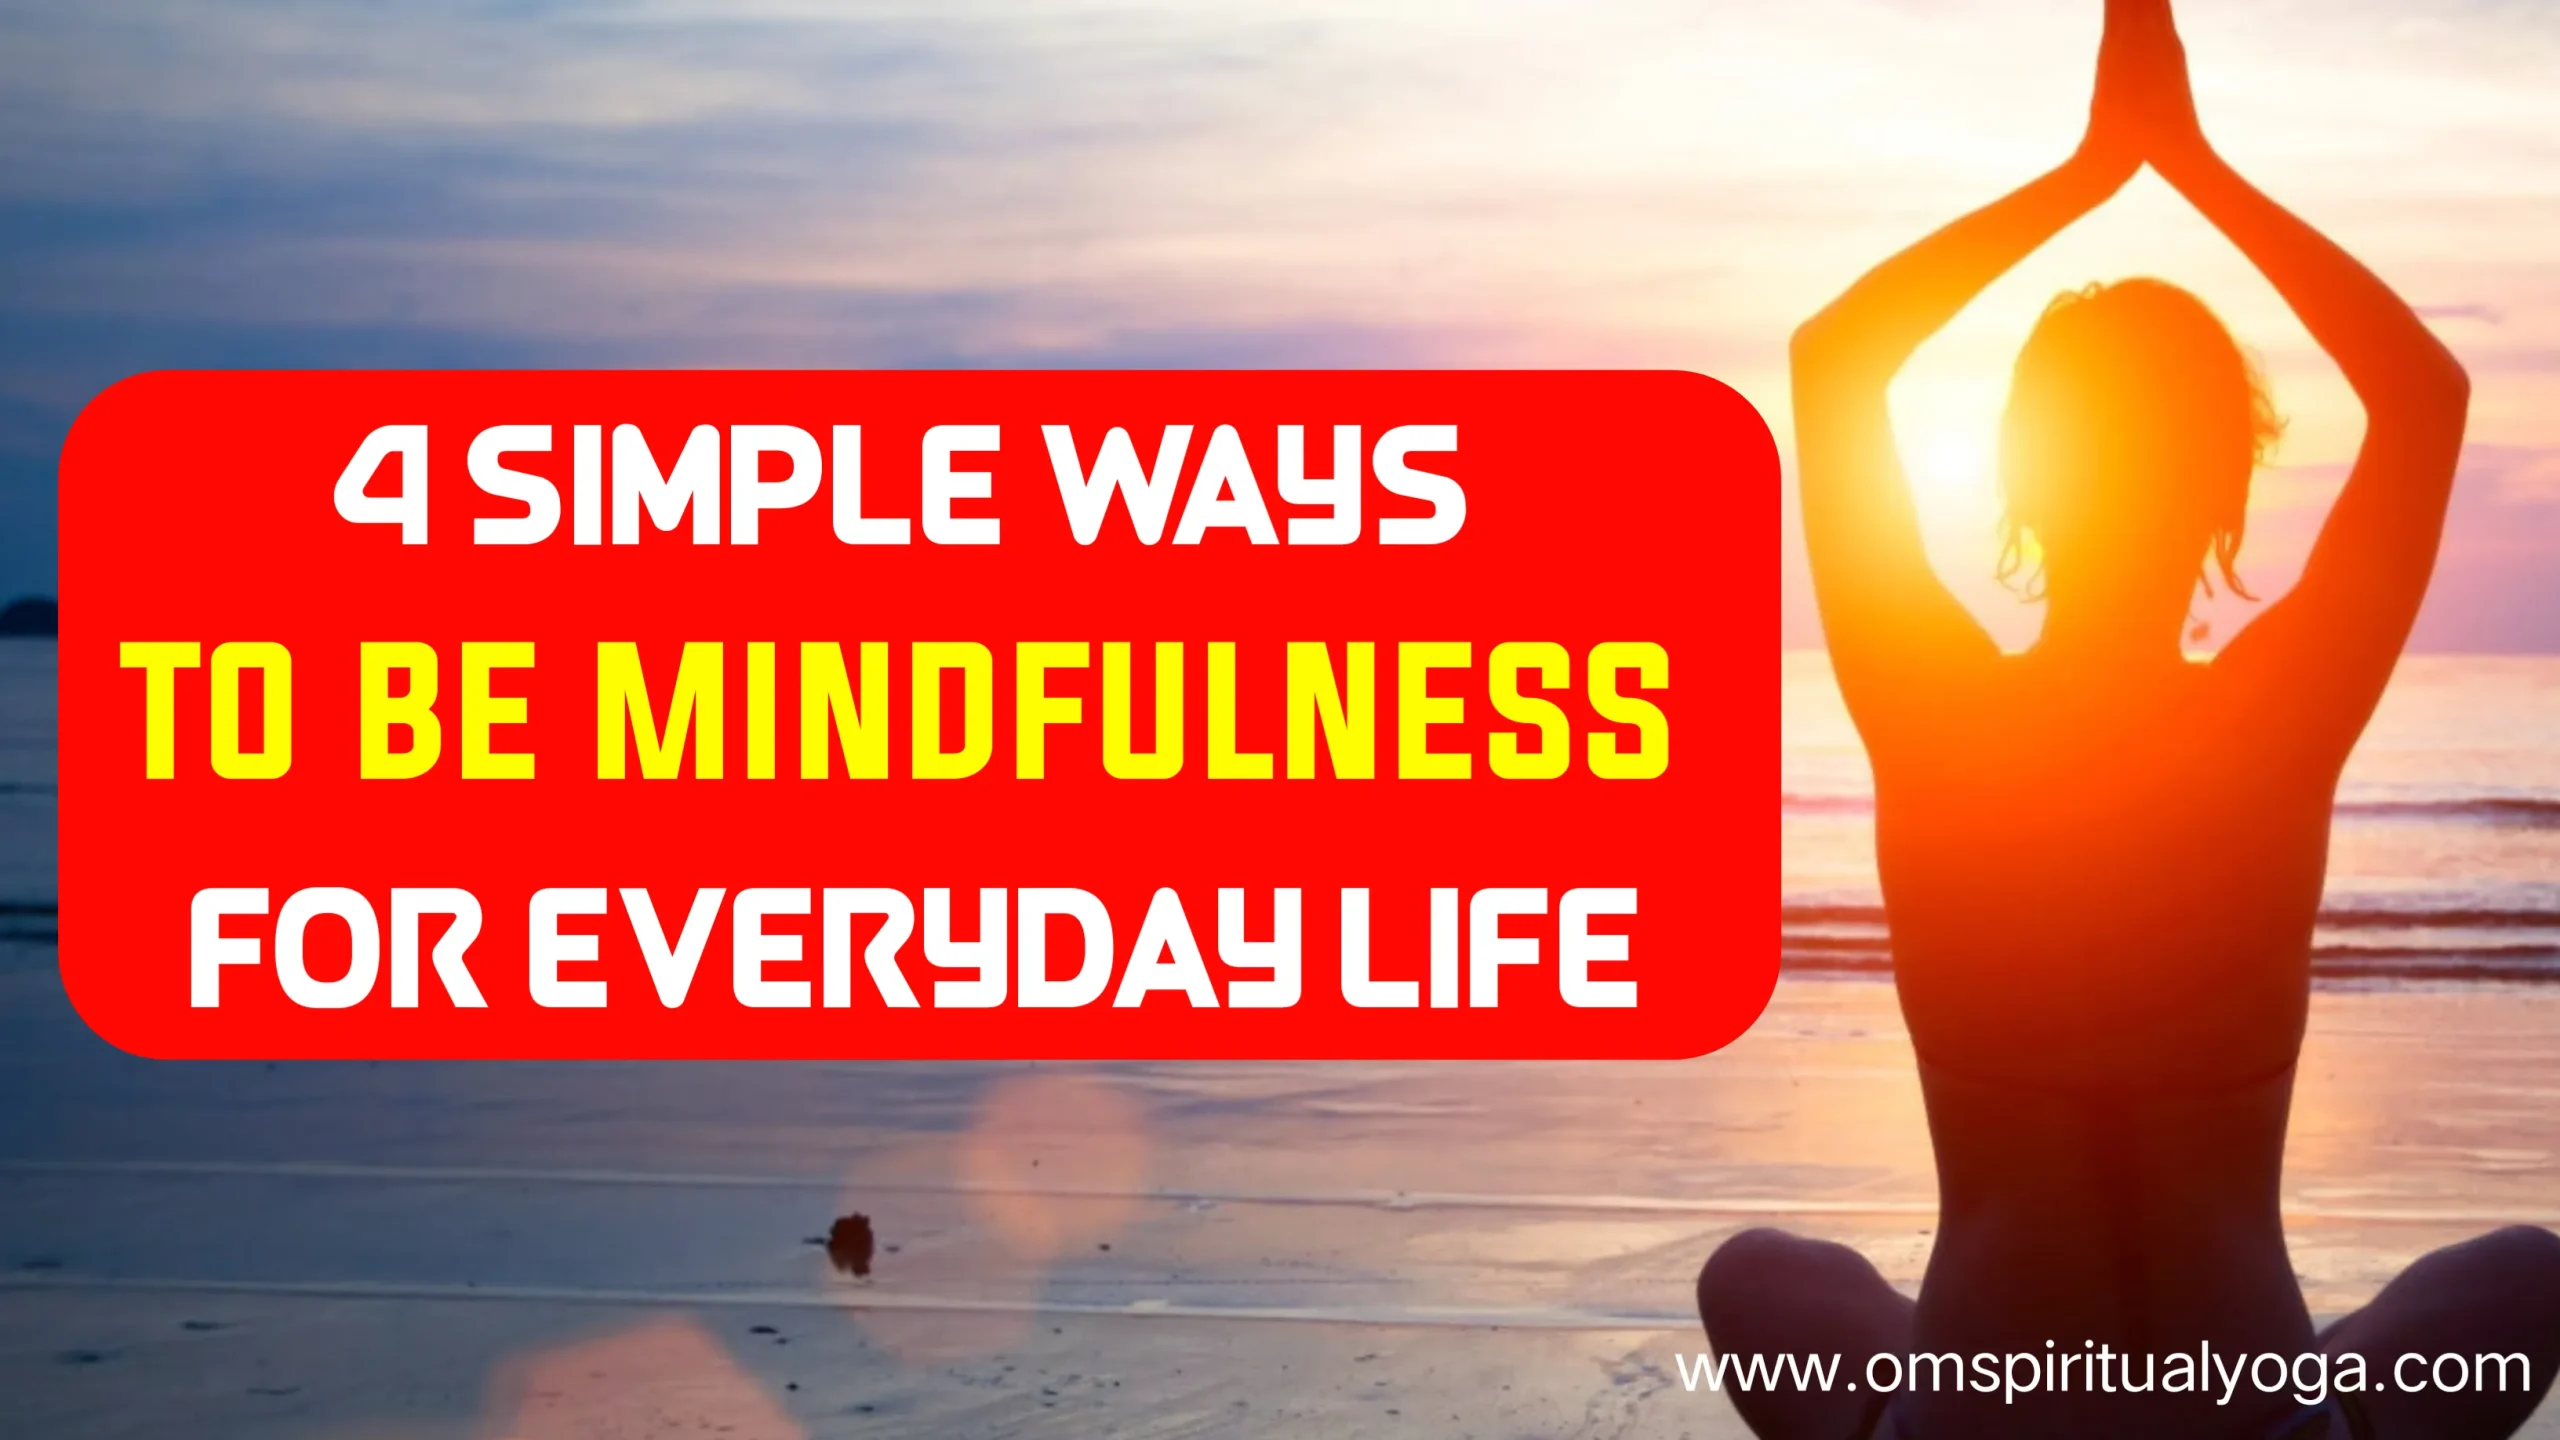 4 Simple Ways To Be Mindfulness For Everyday Life